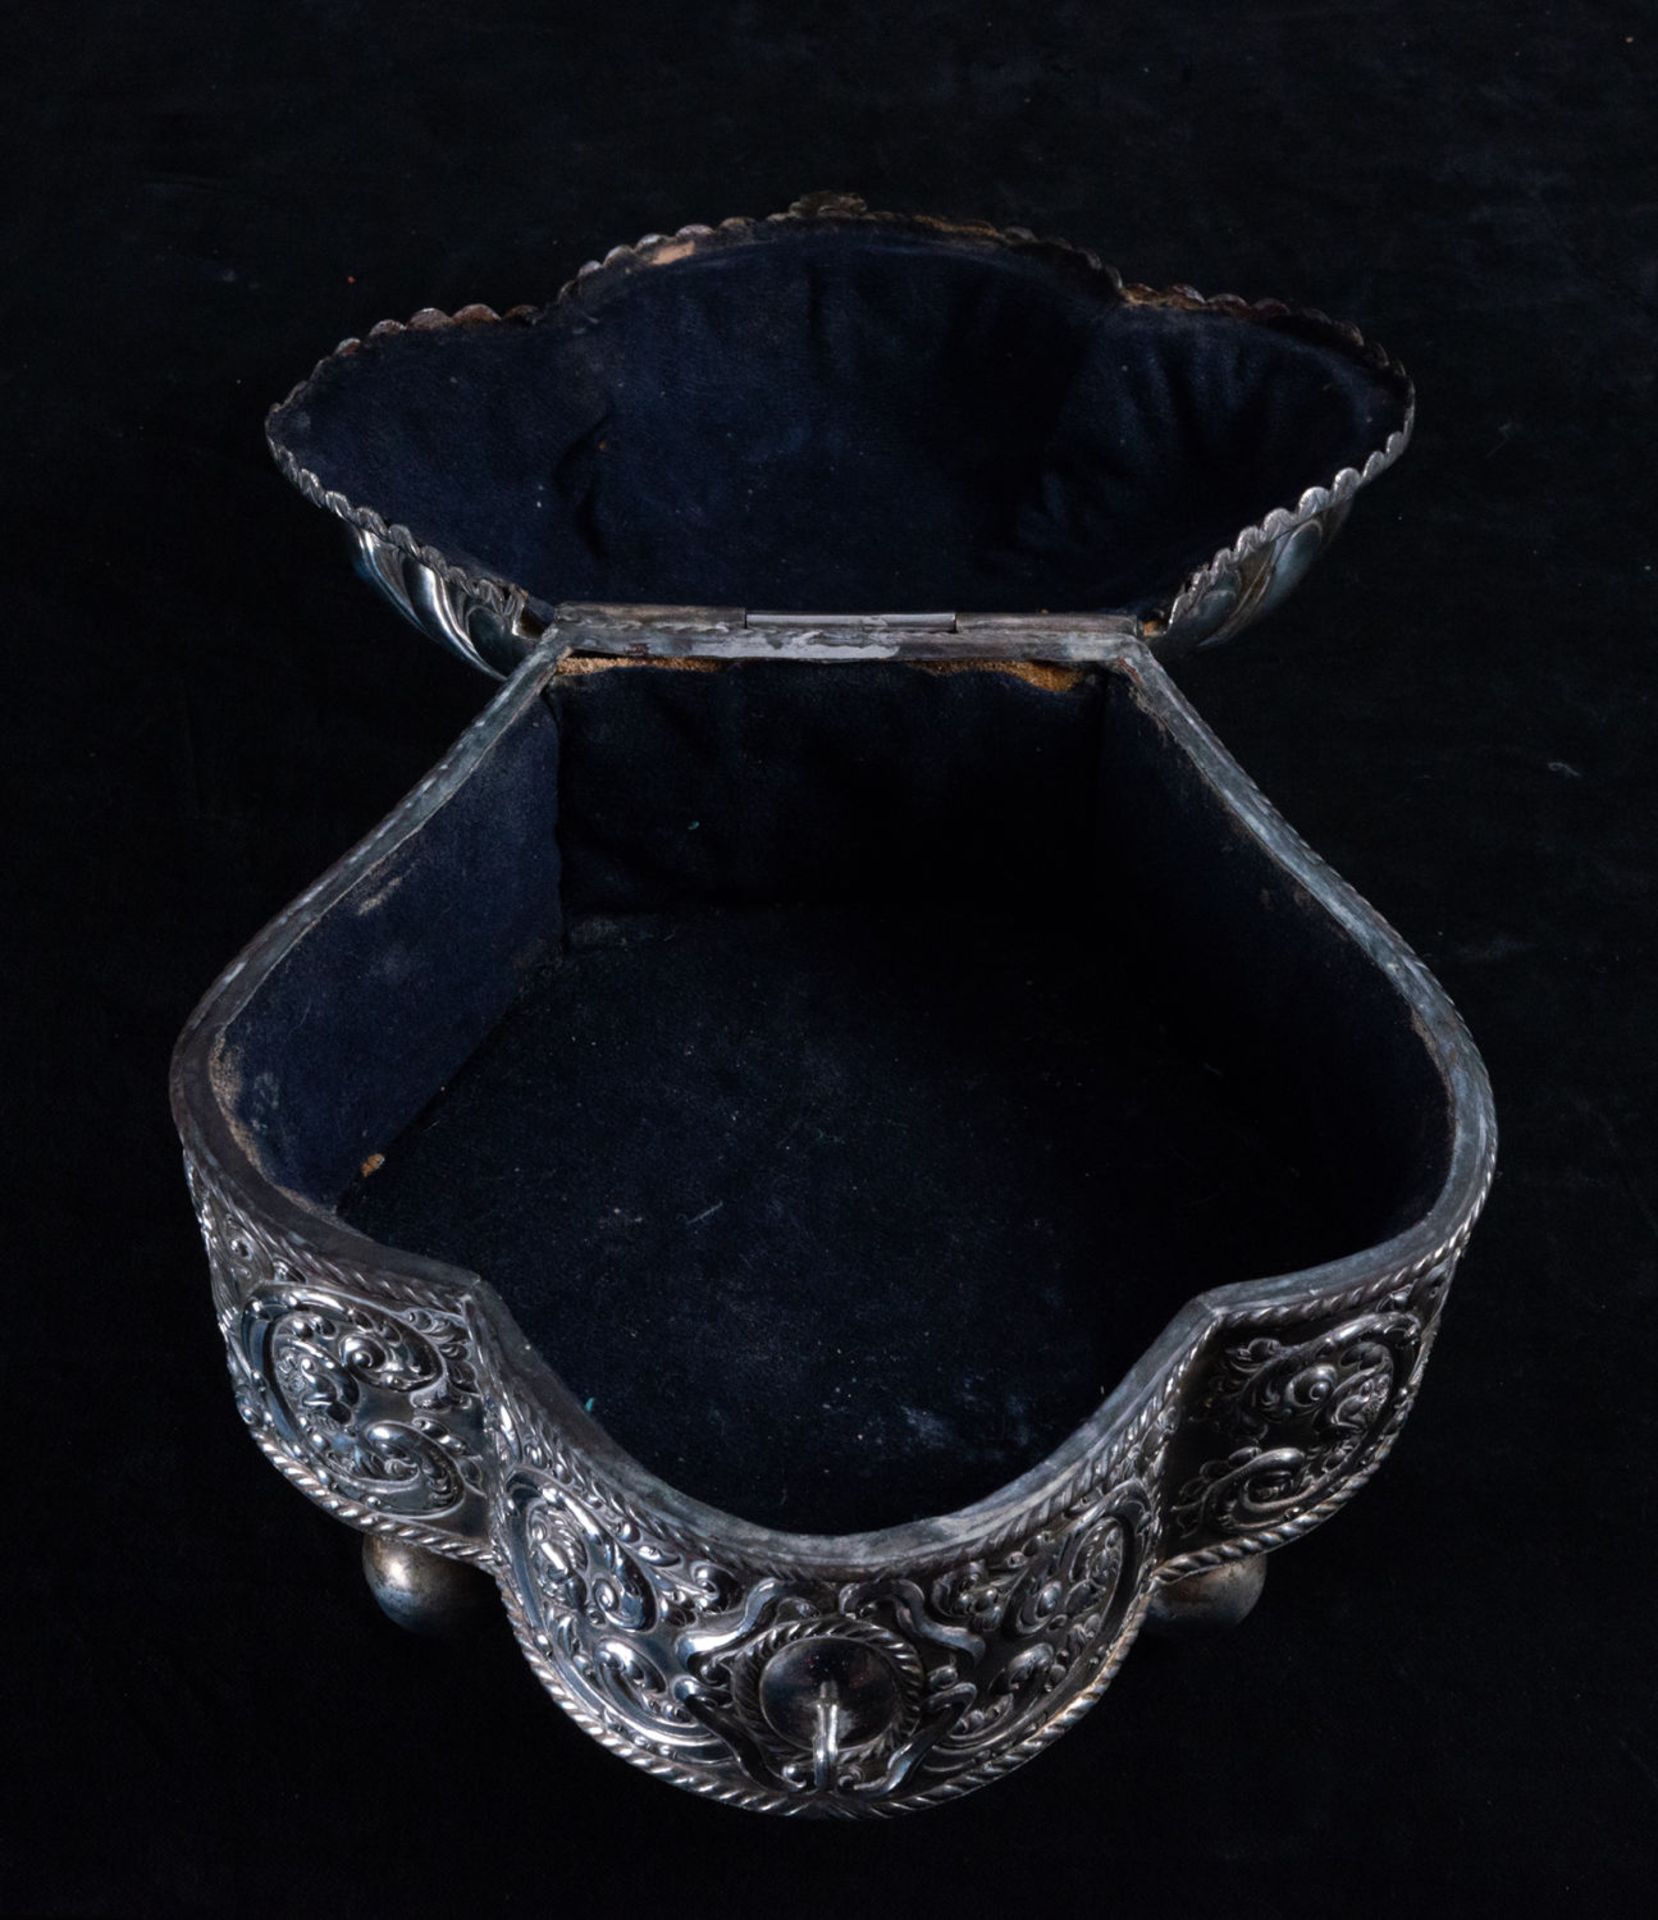 Exceptional Coquera in silver, colonial work, Cuzco, Peru, 18th century - Image 8 of 8